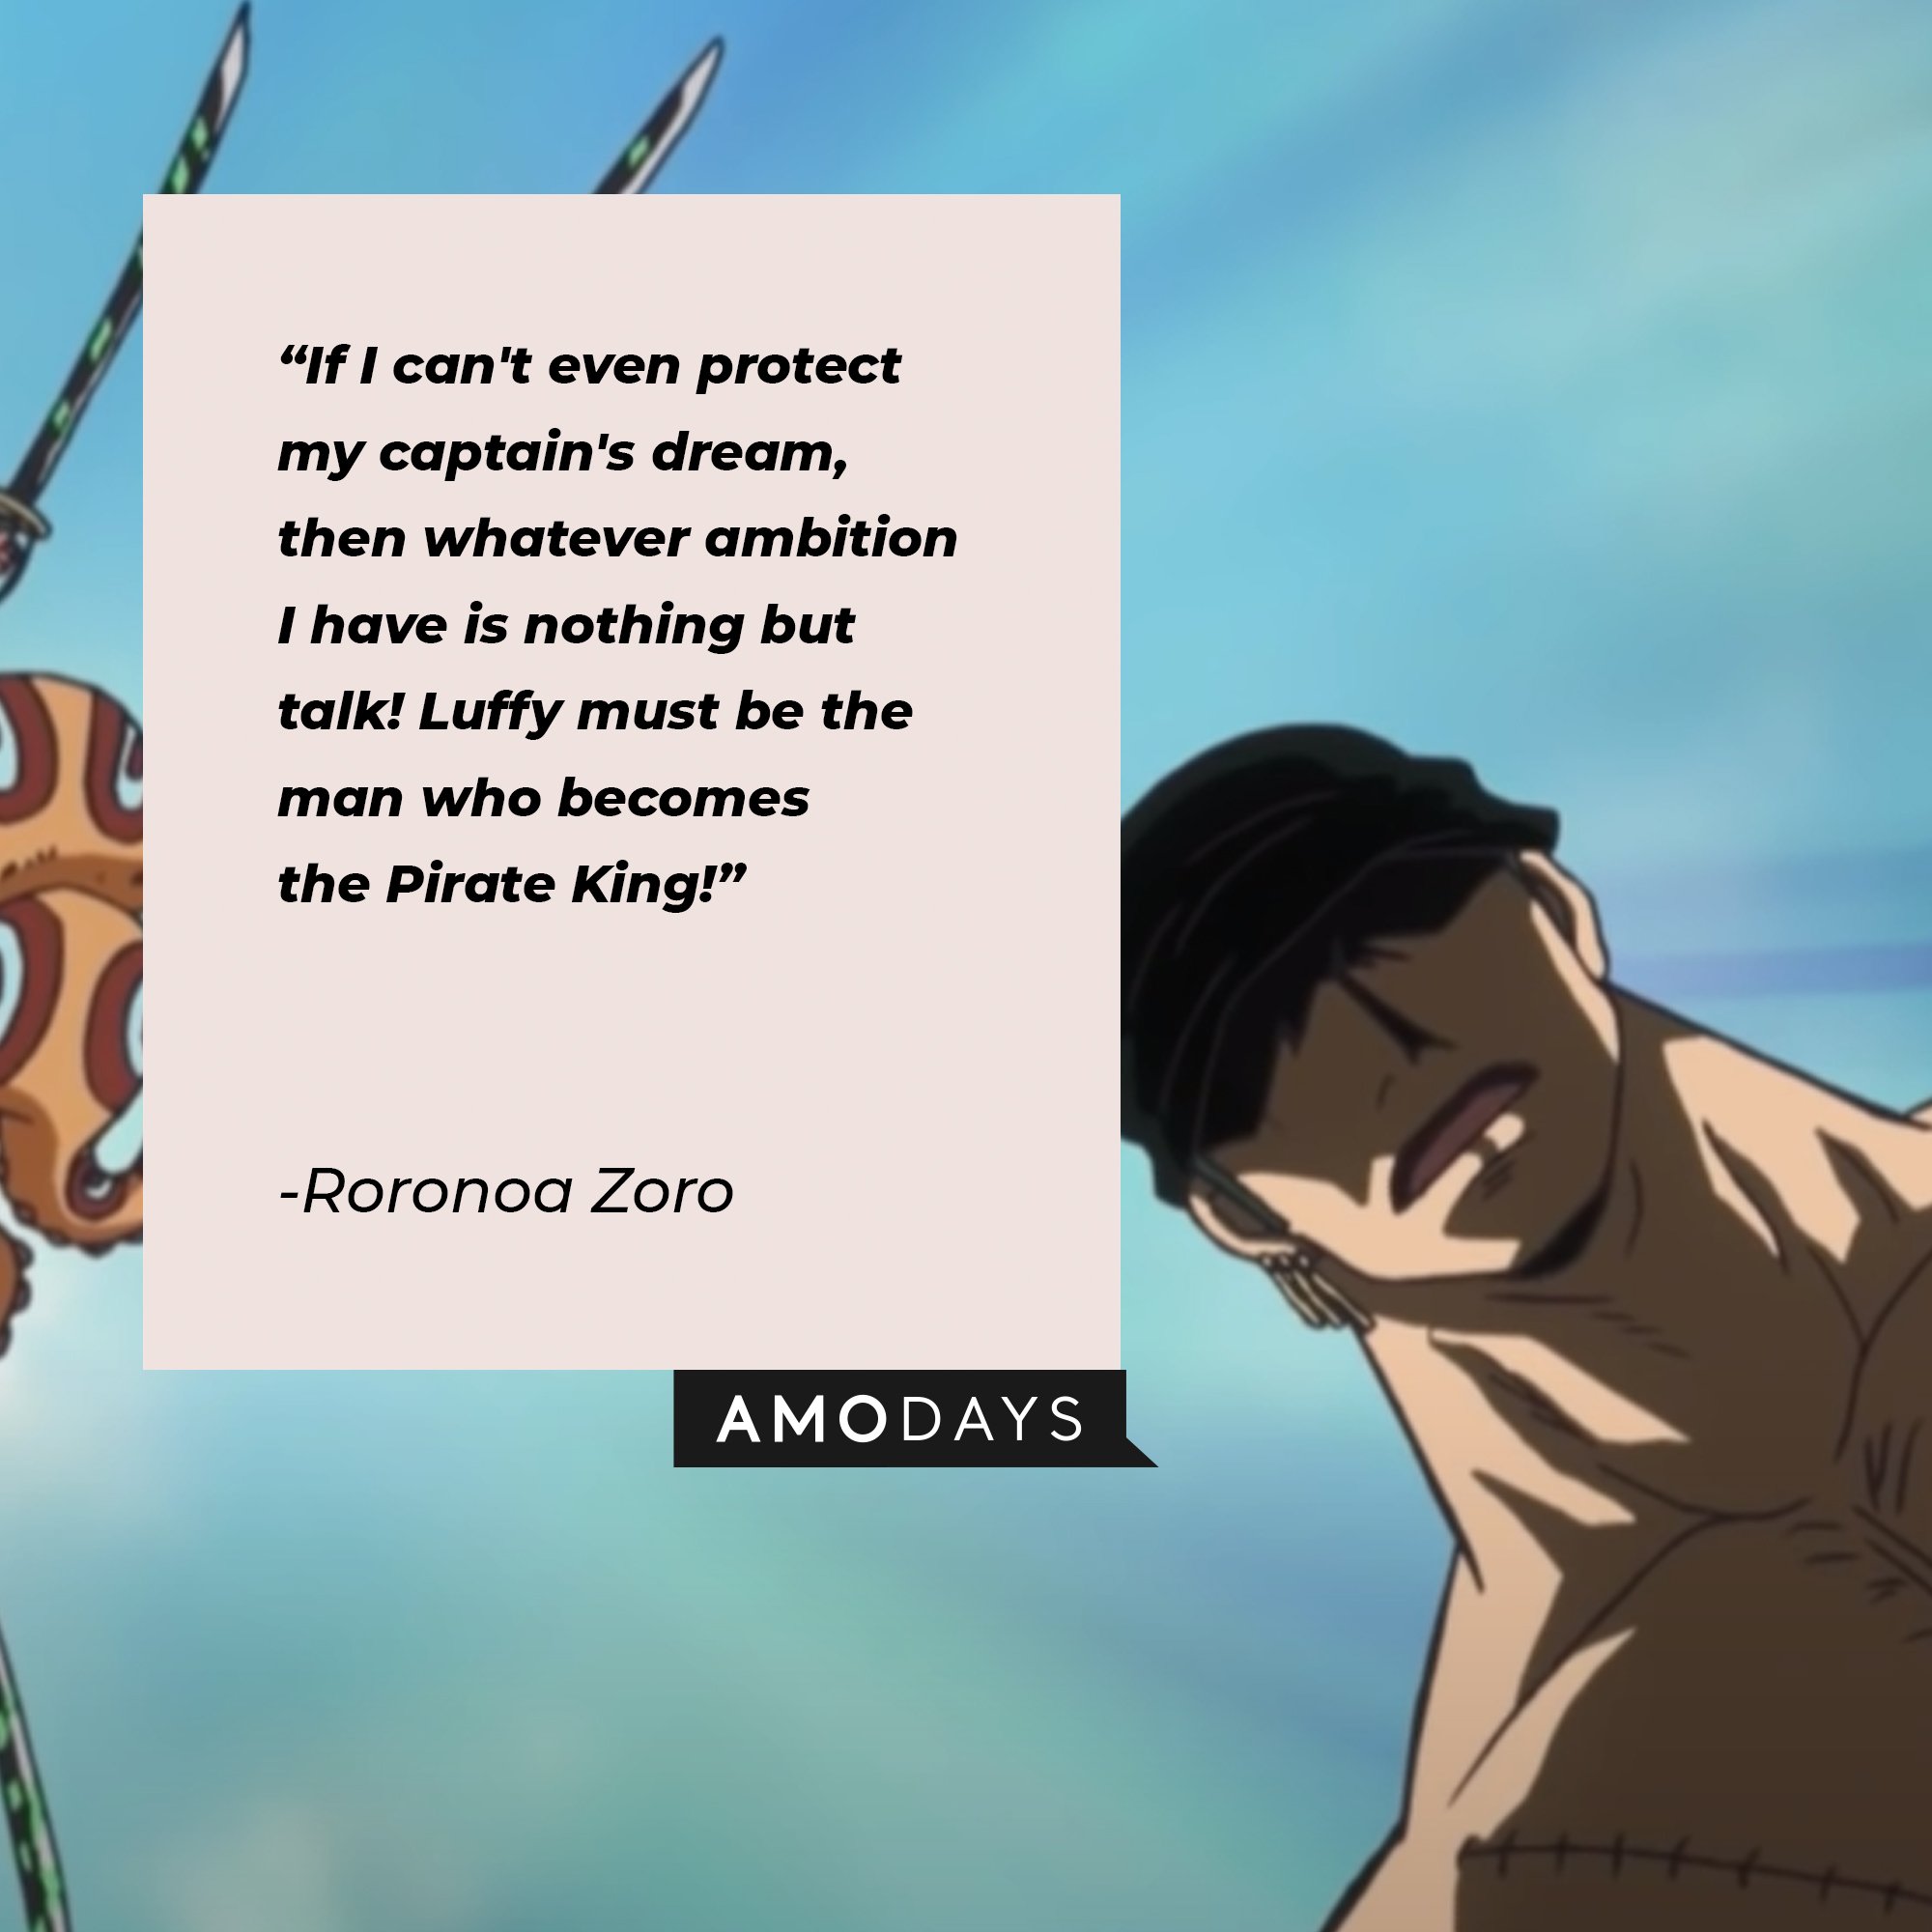 Roronoa Zoro’s quote: "If I can't even protect my captain's dream, then whatever ambition I have is nothing but talk!“ |  Image: AmoDays